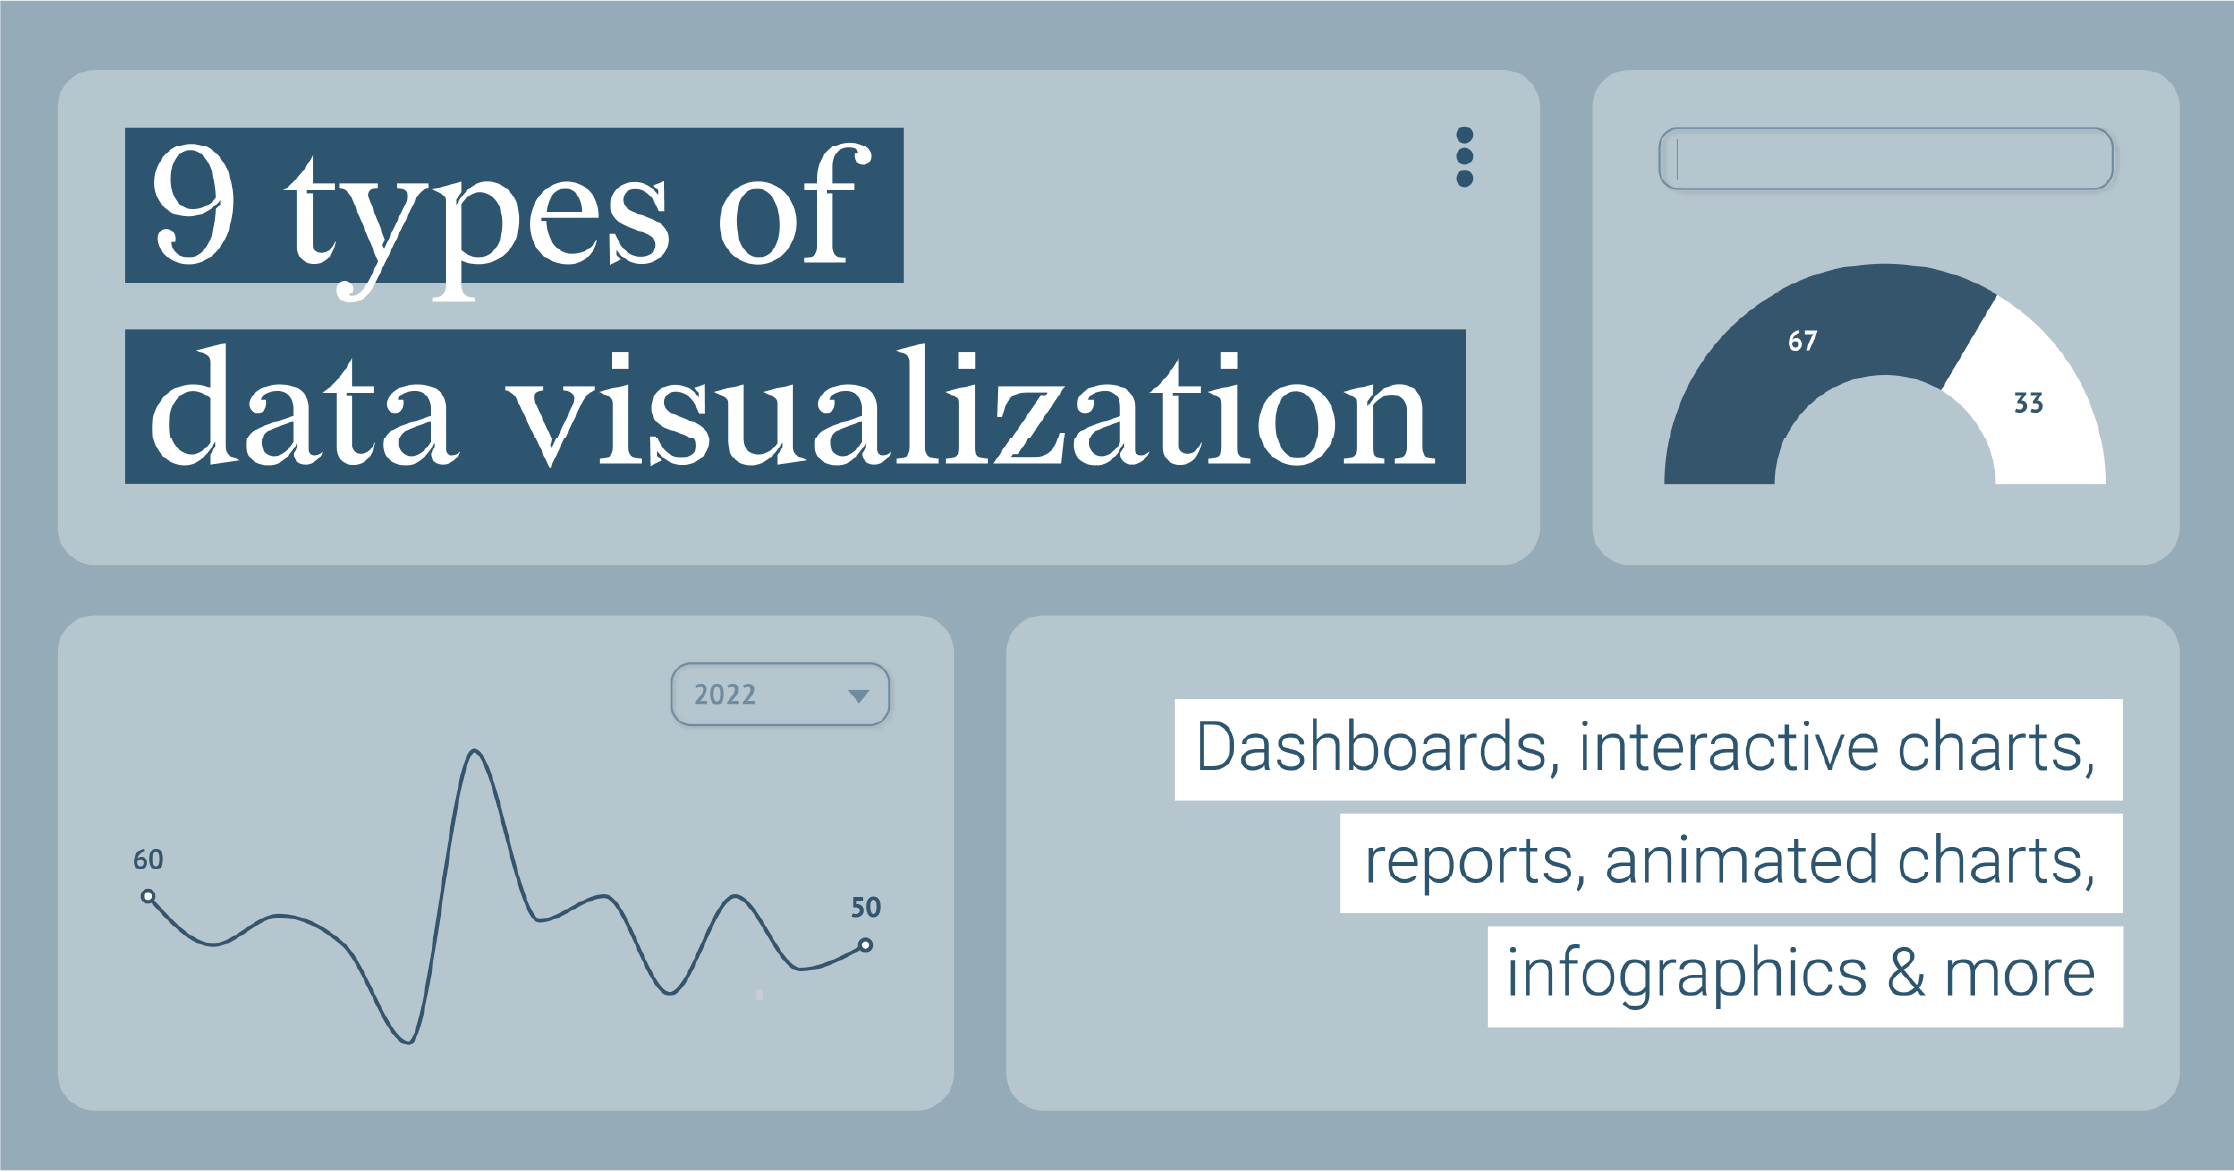 Discover 9 types of data visualizations. Dashboards, charts, interactive charts, static charts, presentations, infographics, data story websites and data art